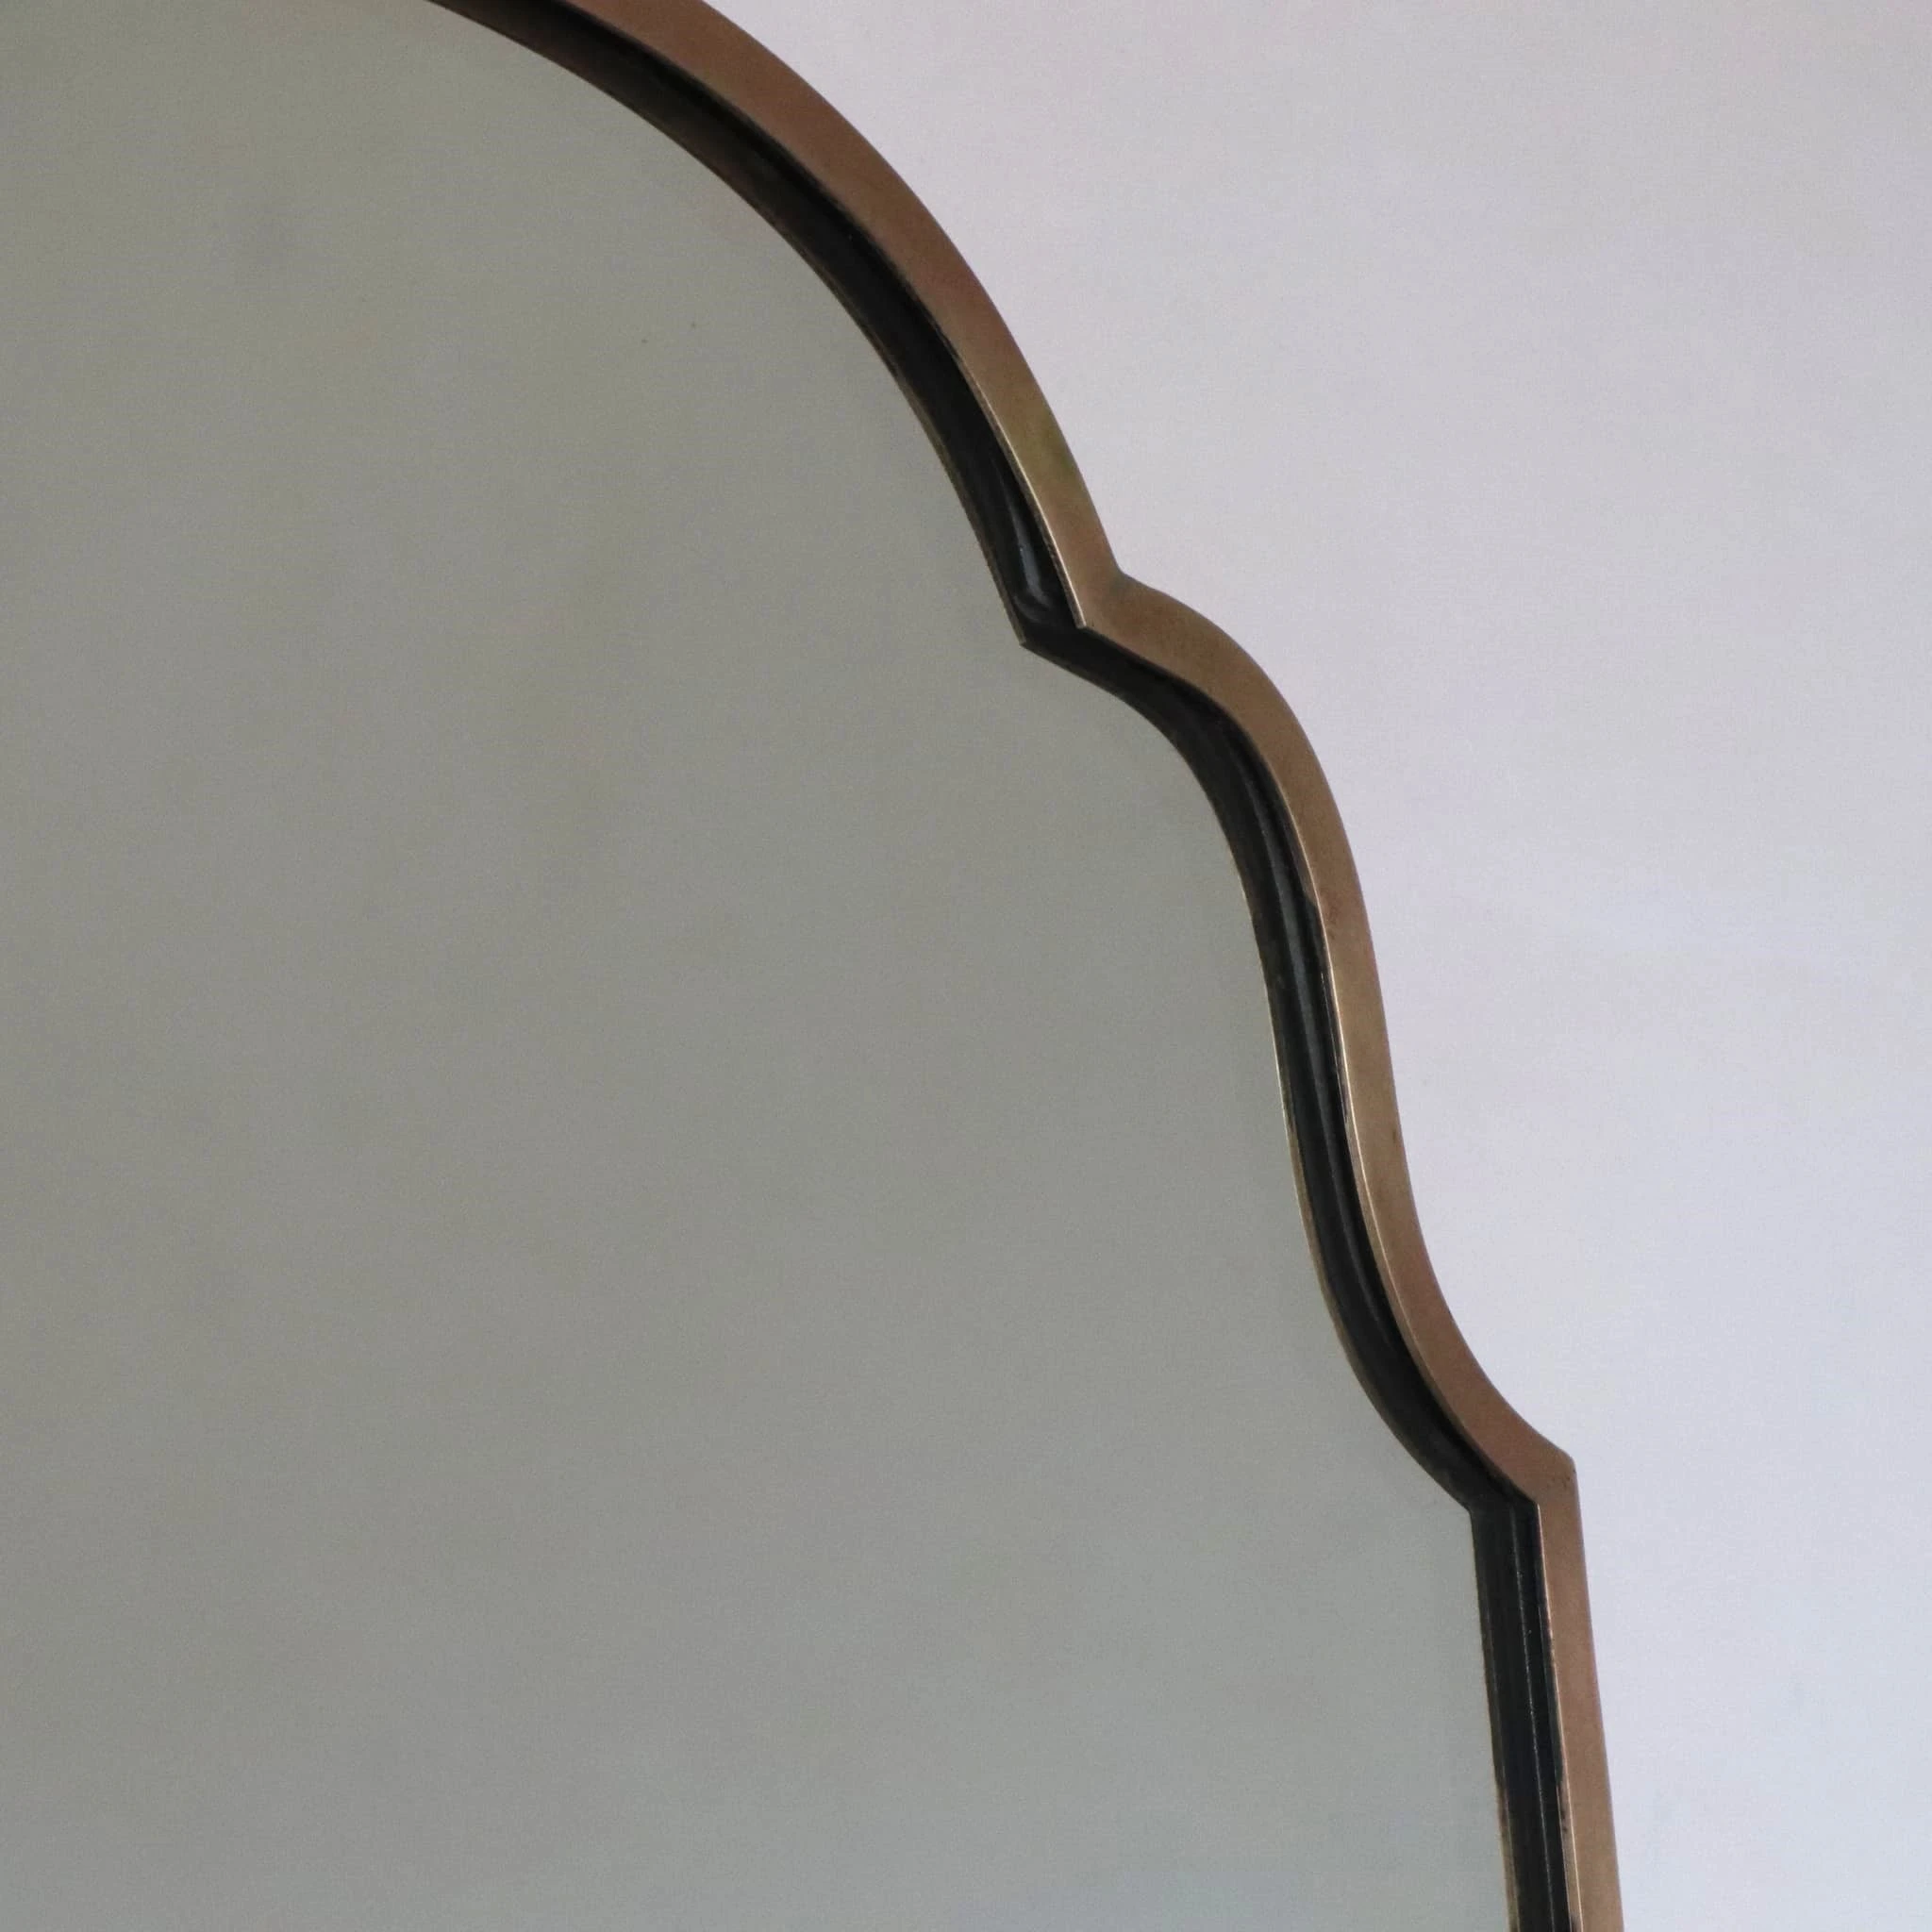 visionidepoca-modern-antique-vintage-mirror-shaped-rounded-shield-1960s-detail-view-top-side